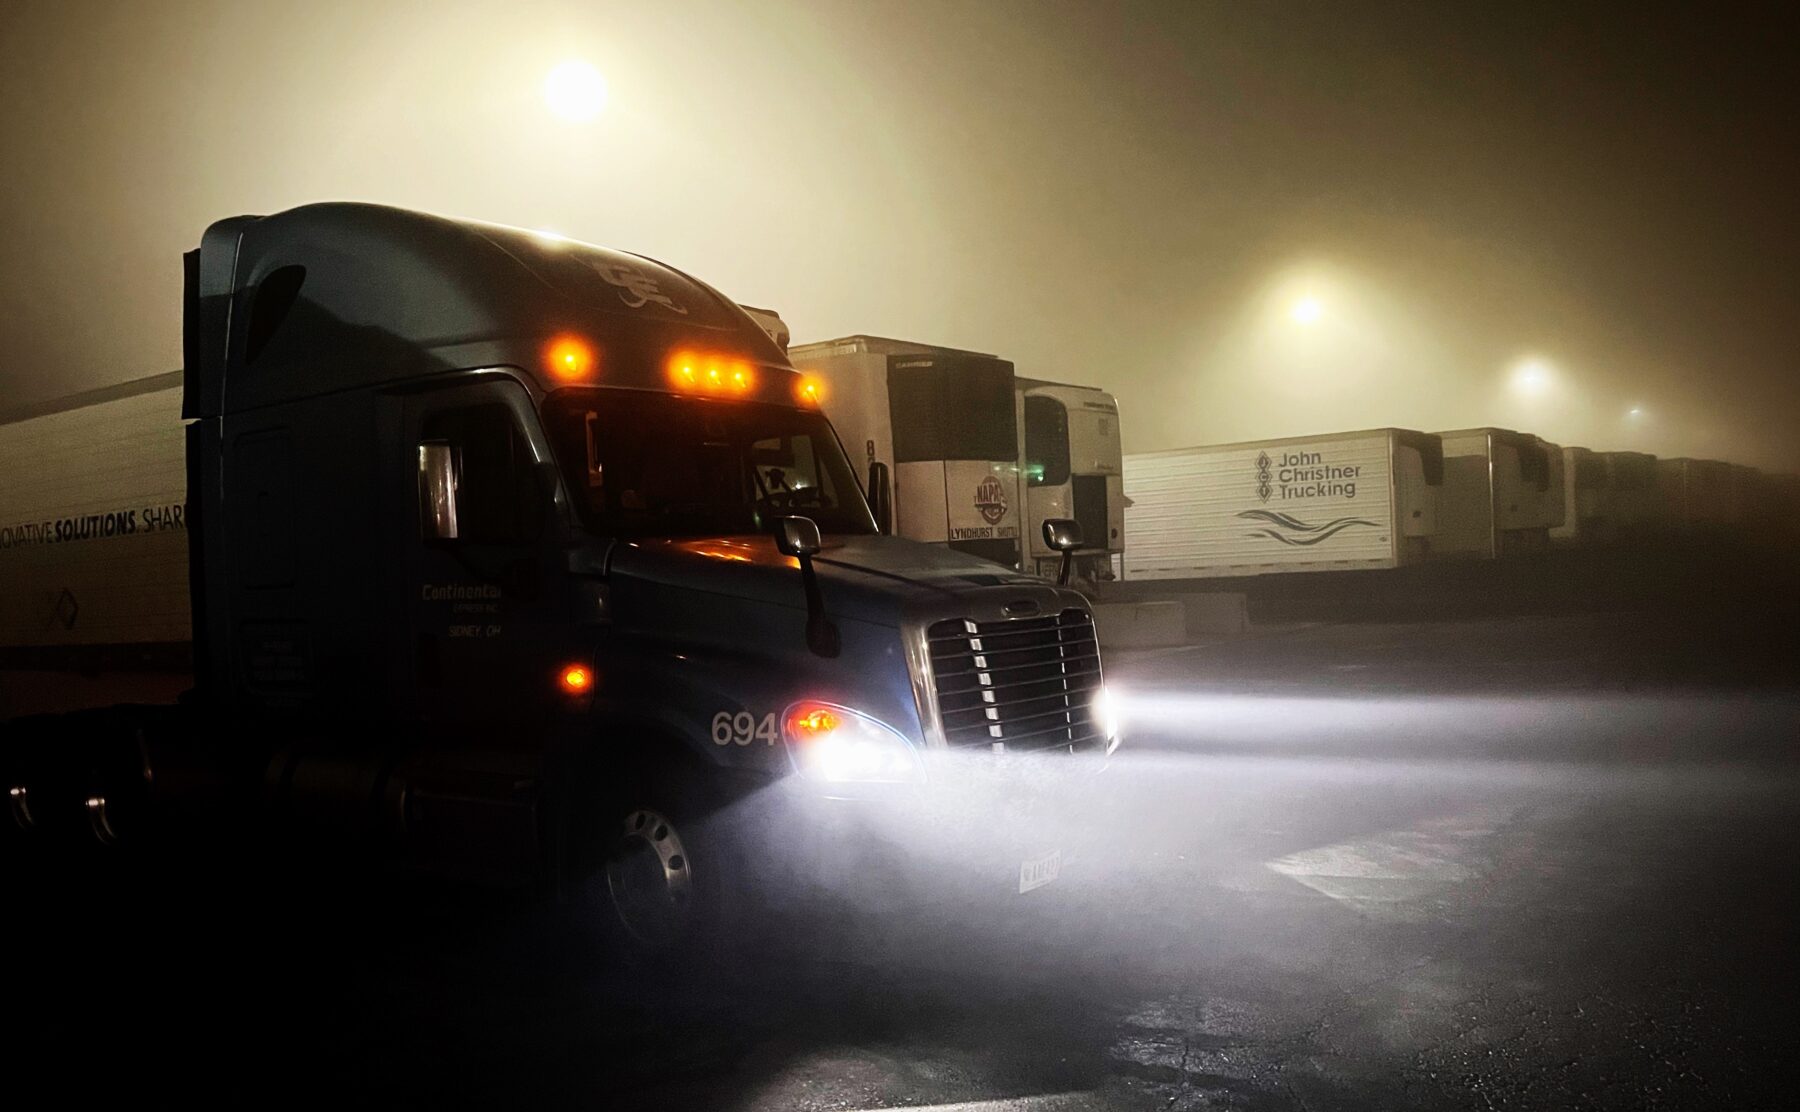 An image of Ned's truck on a foggy evening